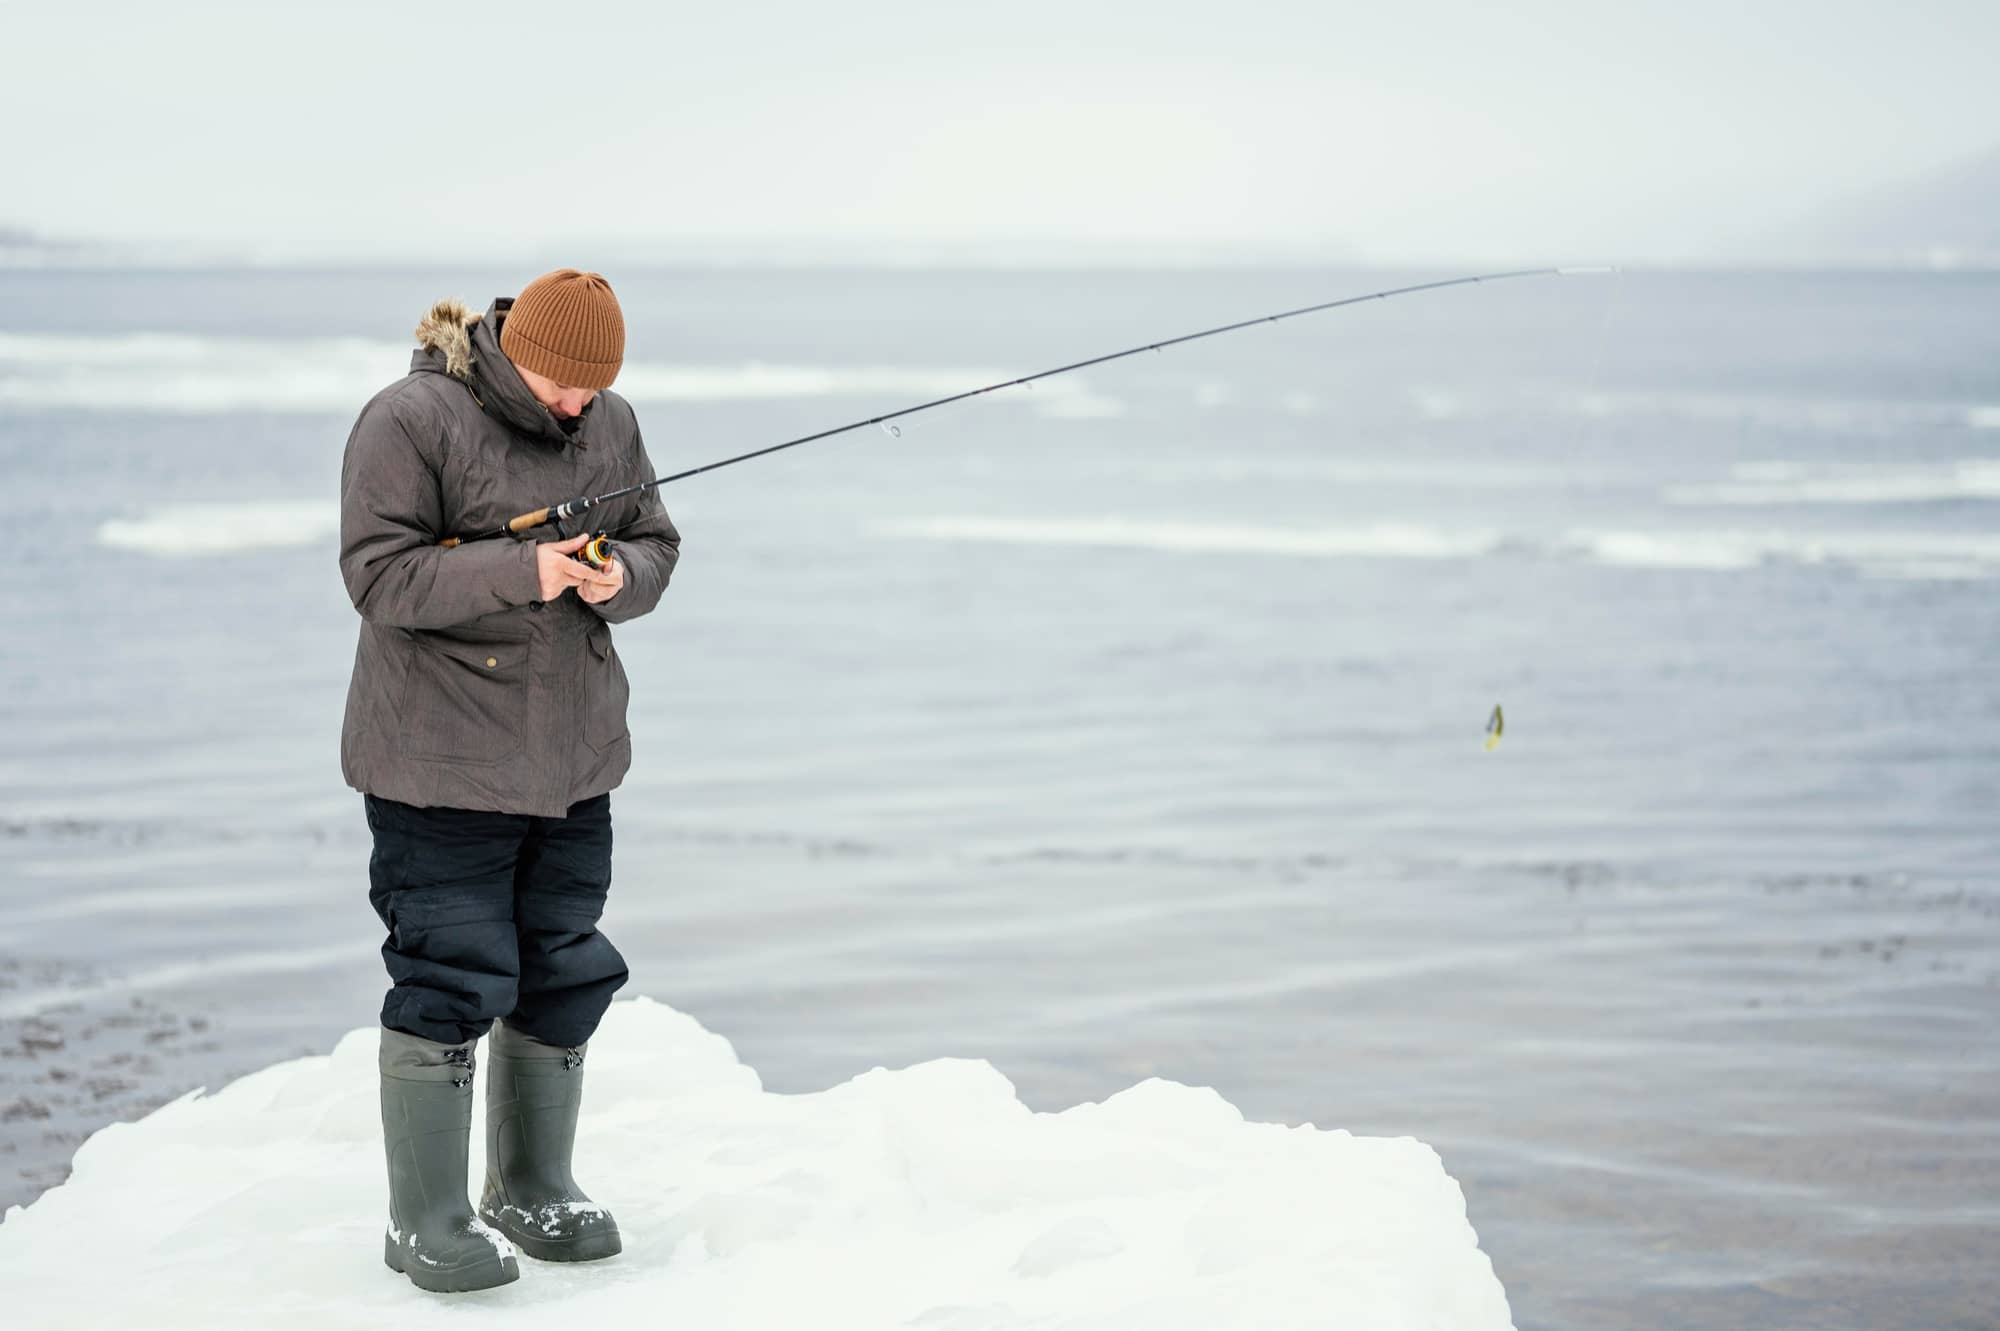 Top Picks for Unique Gifts for Ice Fishing Lovers